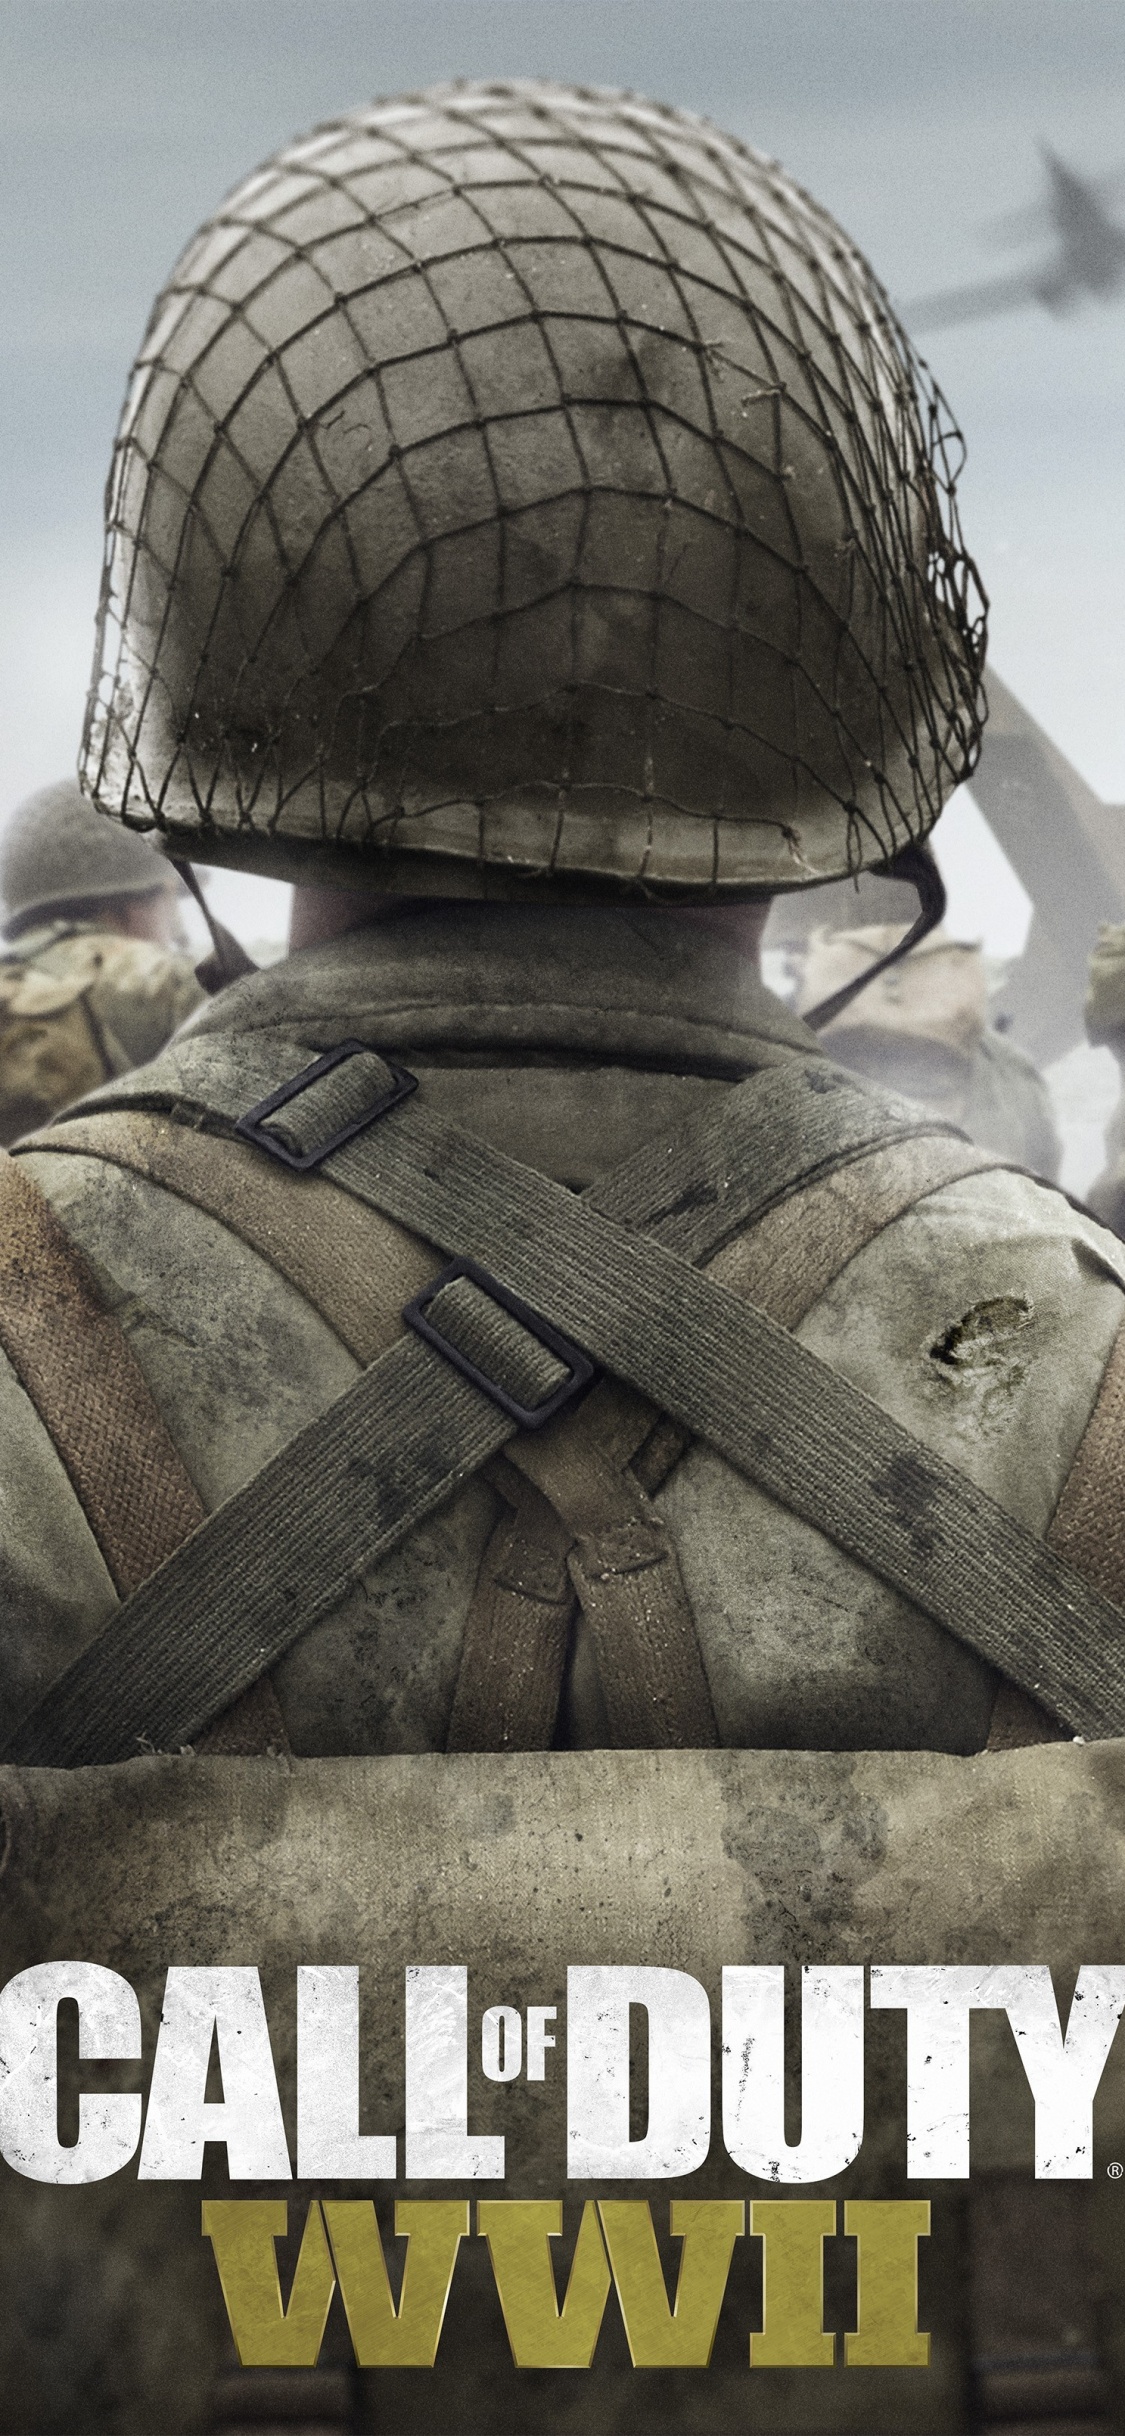 Call of Duty Ww2, Call of Duty WWII, Activision, Sledgehammer Games, Soldat. Wallpaper in 1125x2436 Resolution